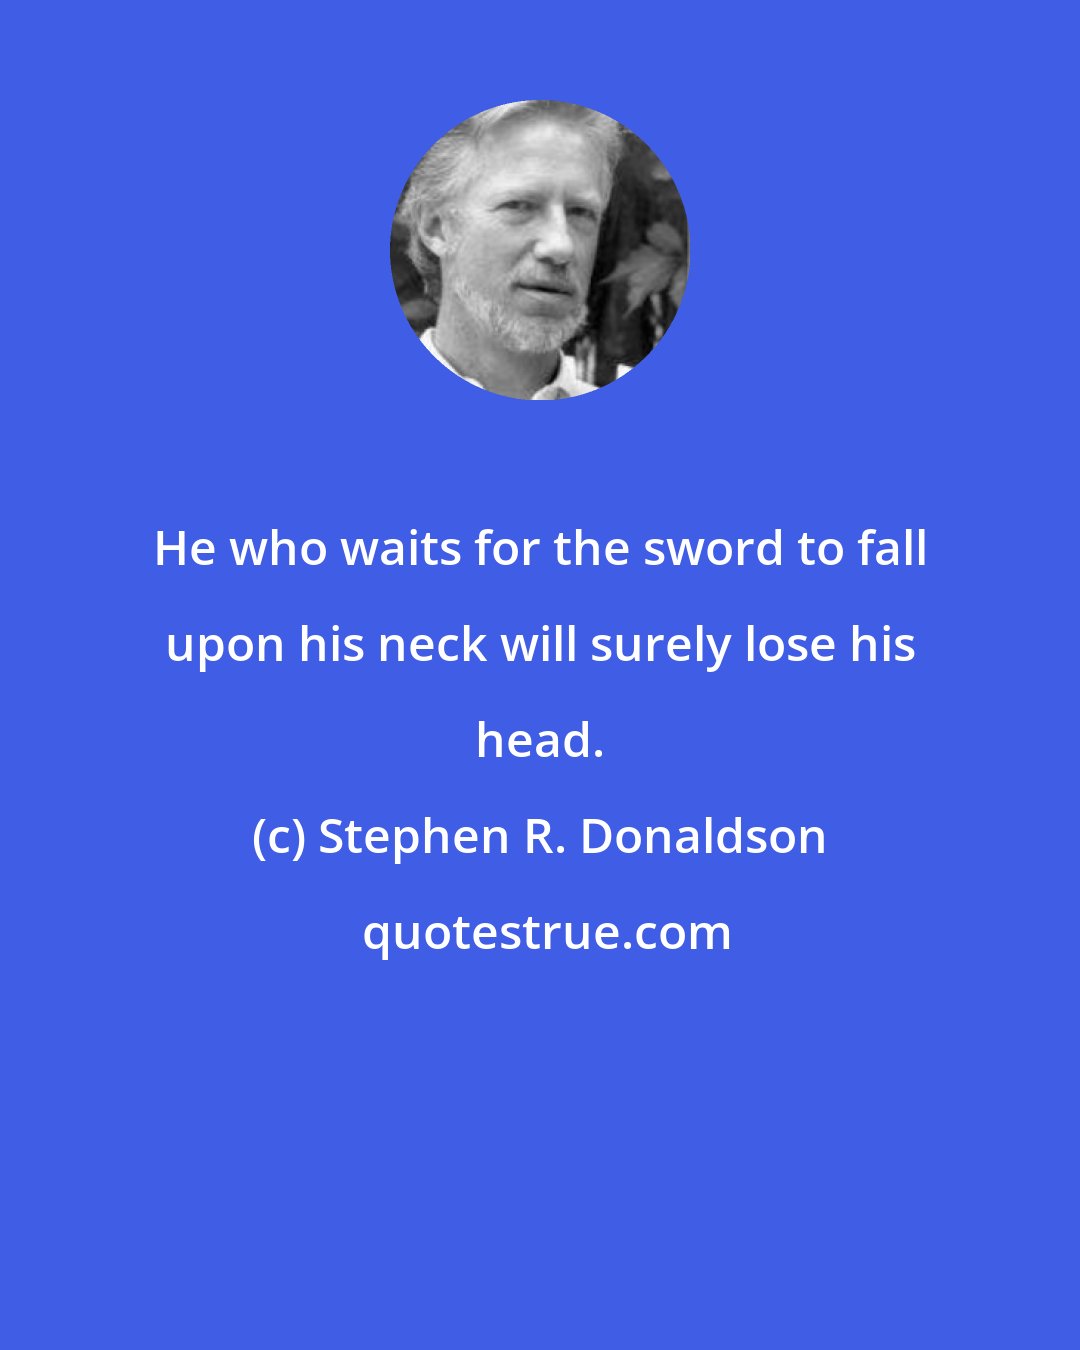 Stephen R. Donaldson: He who waits for the sword to fall upon his neck will surely lose his head.